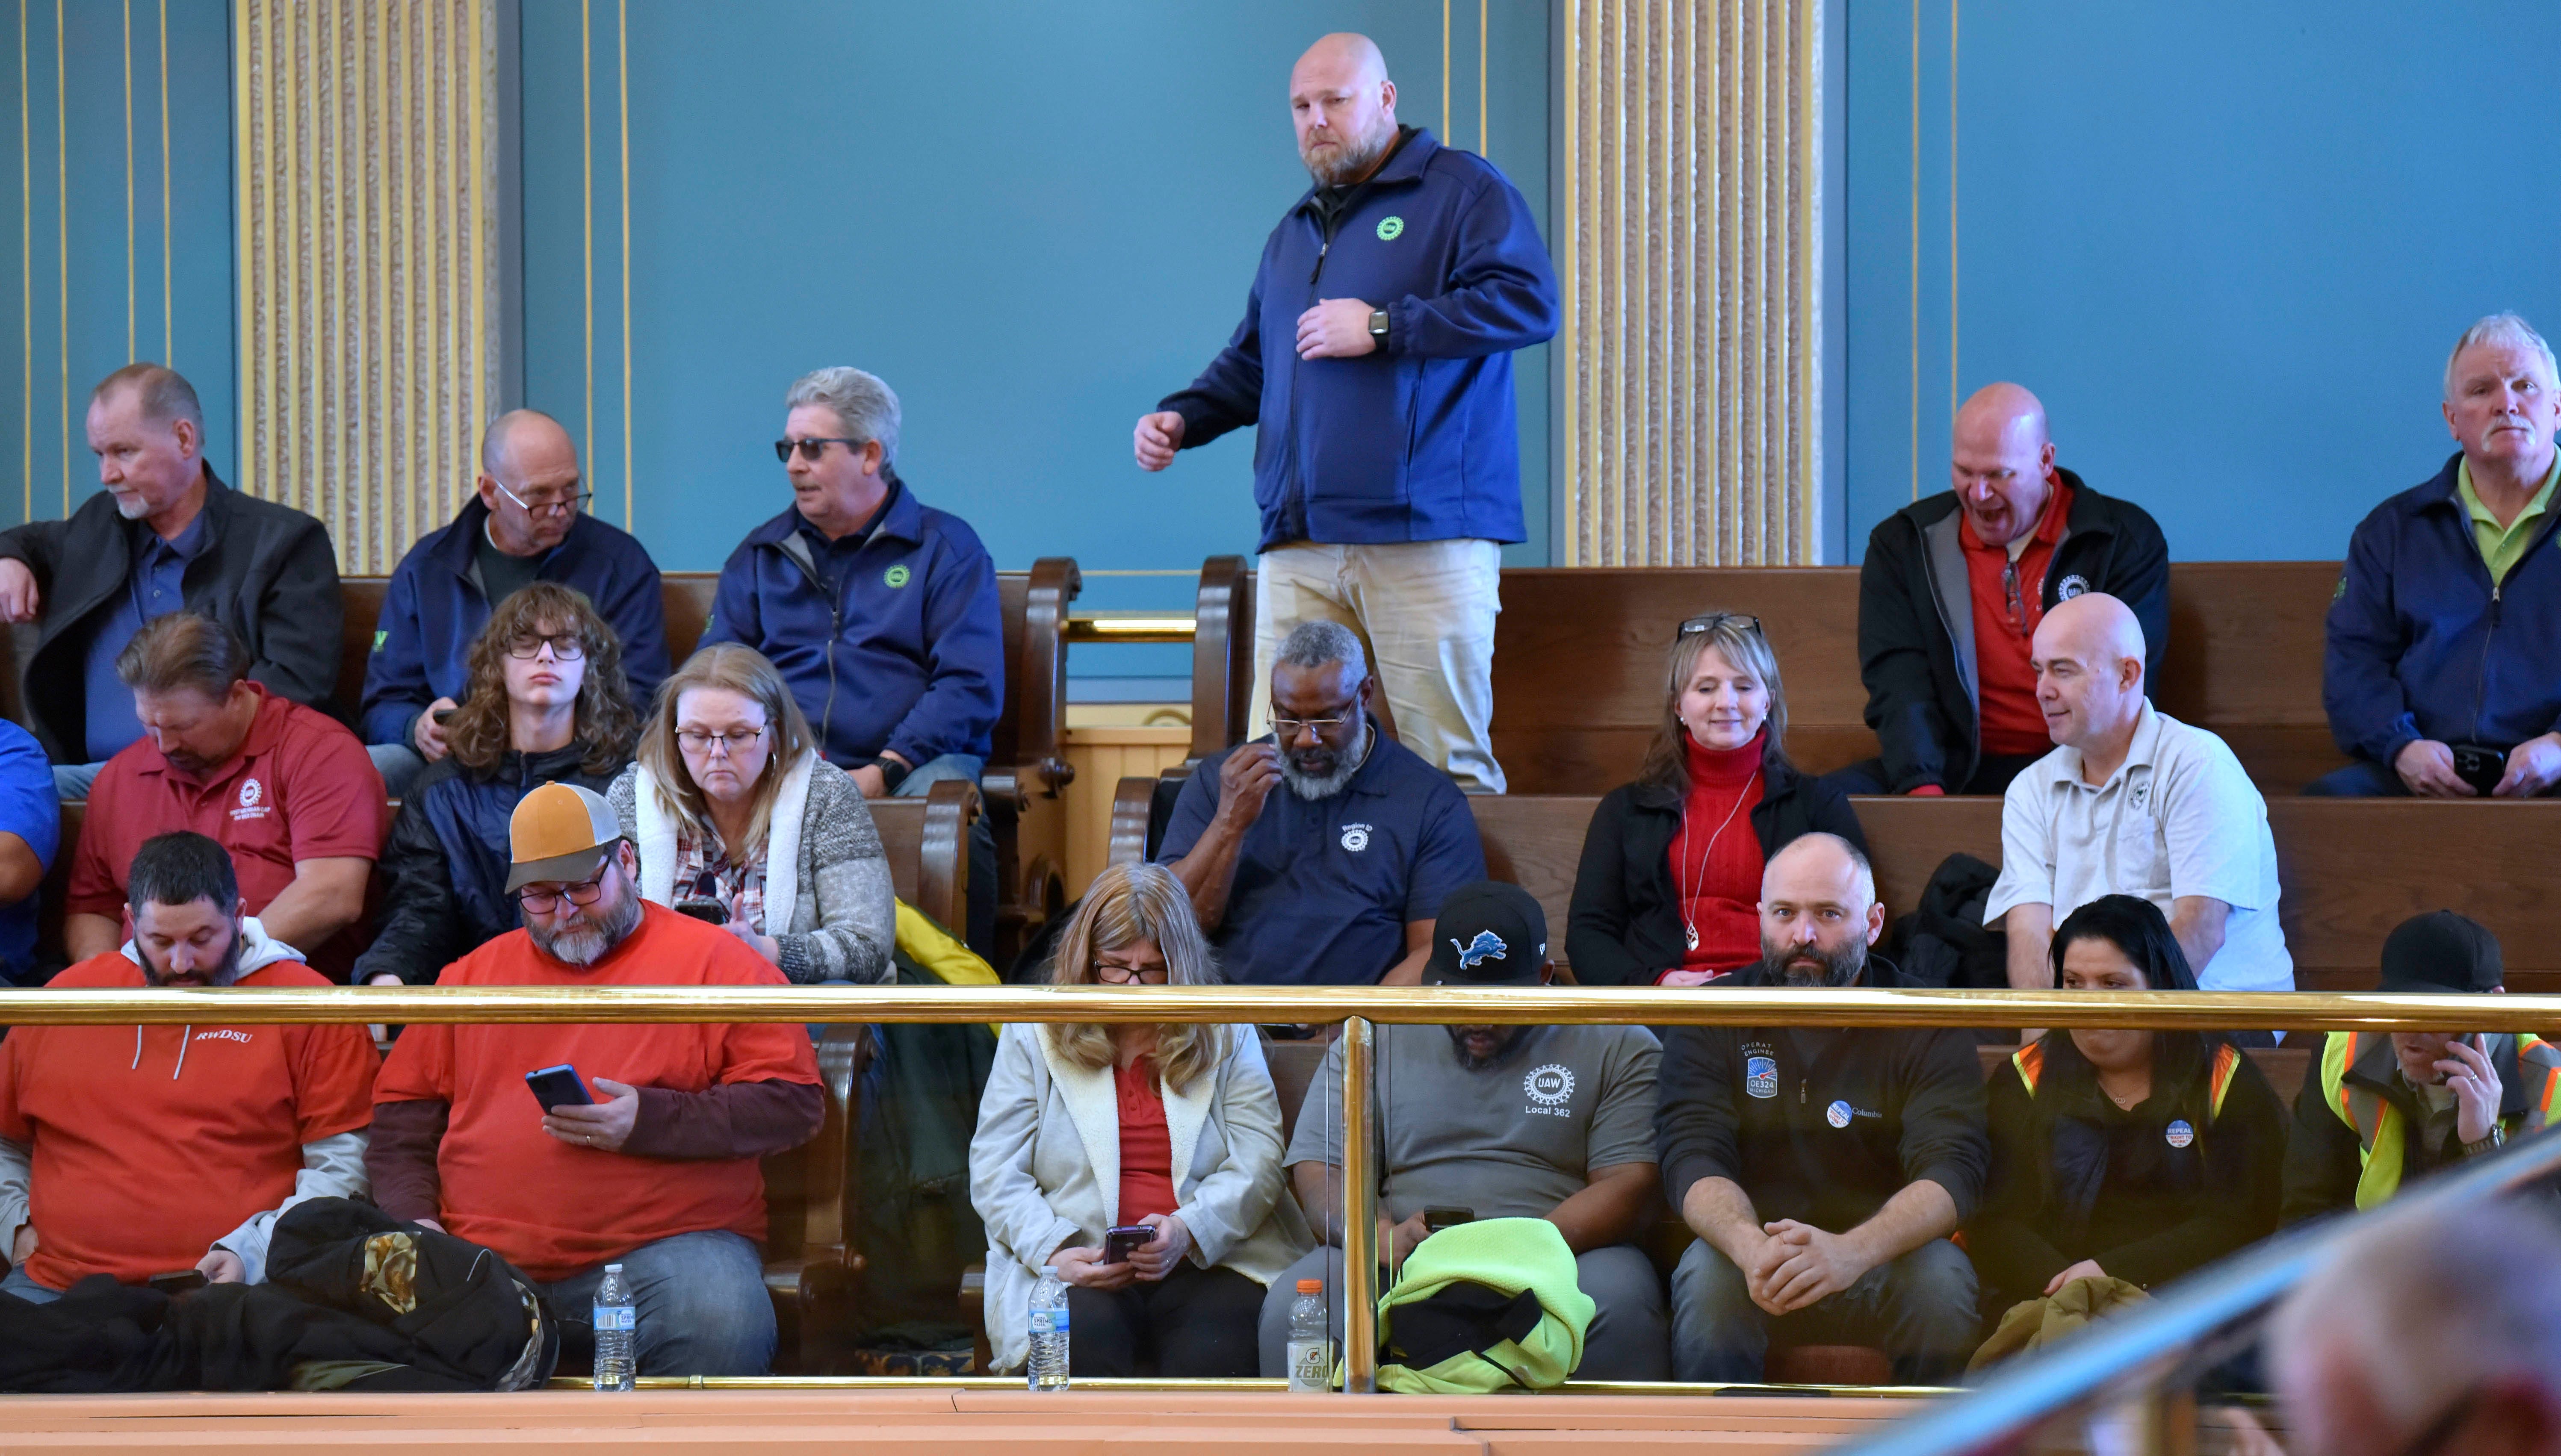 Ted Krumm, of Lansing, stretches while sitting in the gallery with other union members and supporters as they wait for the Senate to vote, Tuesday afternoon, March 14, 2023. Krumm is a UAW Region 1-D Servicing Rep. for the Lansing area.